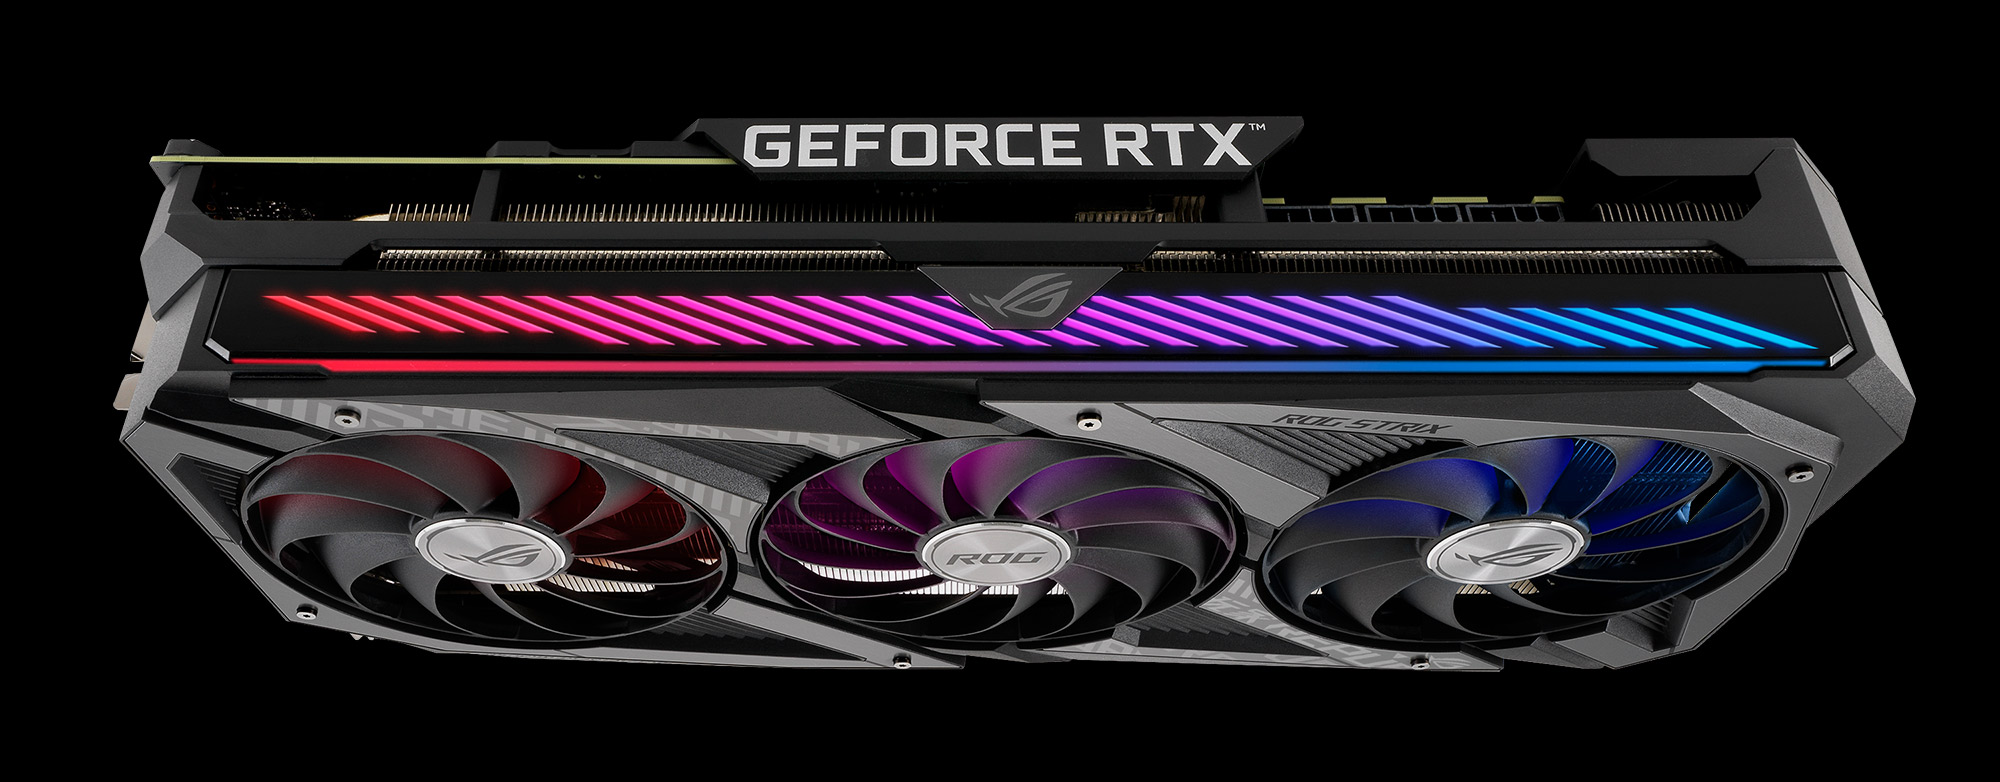 ROG Strix vs TUF vs Dual and beyond: Which ASUS graphics card is right for  you?